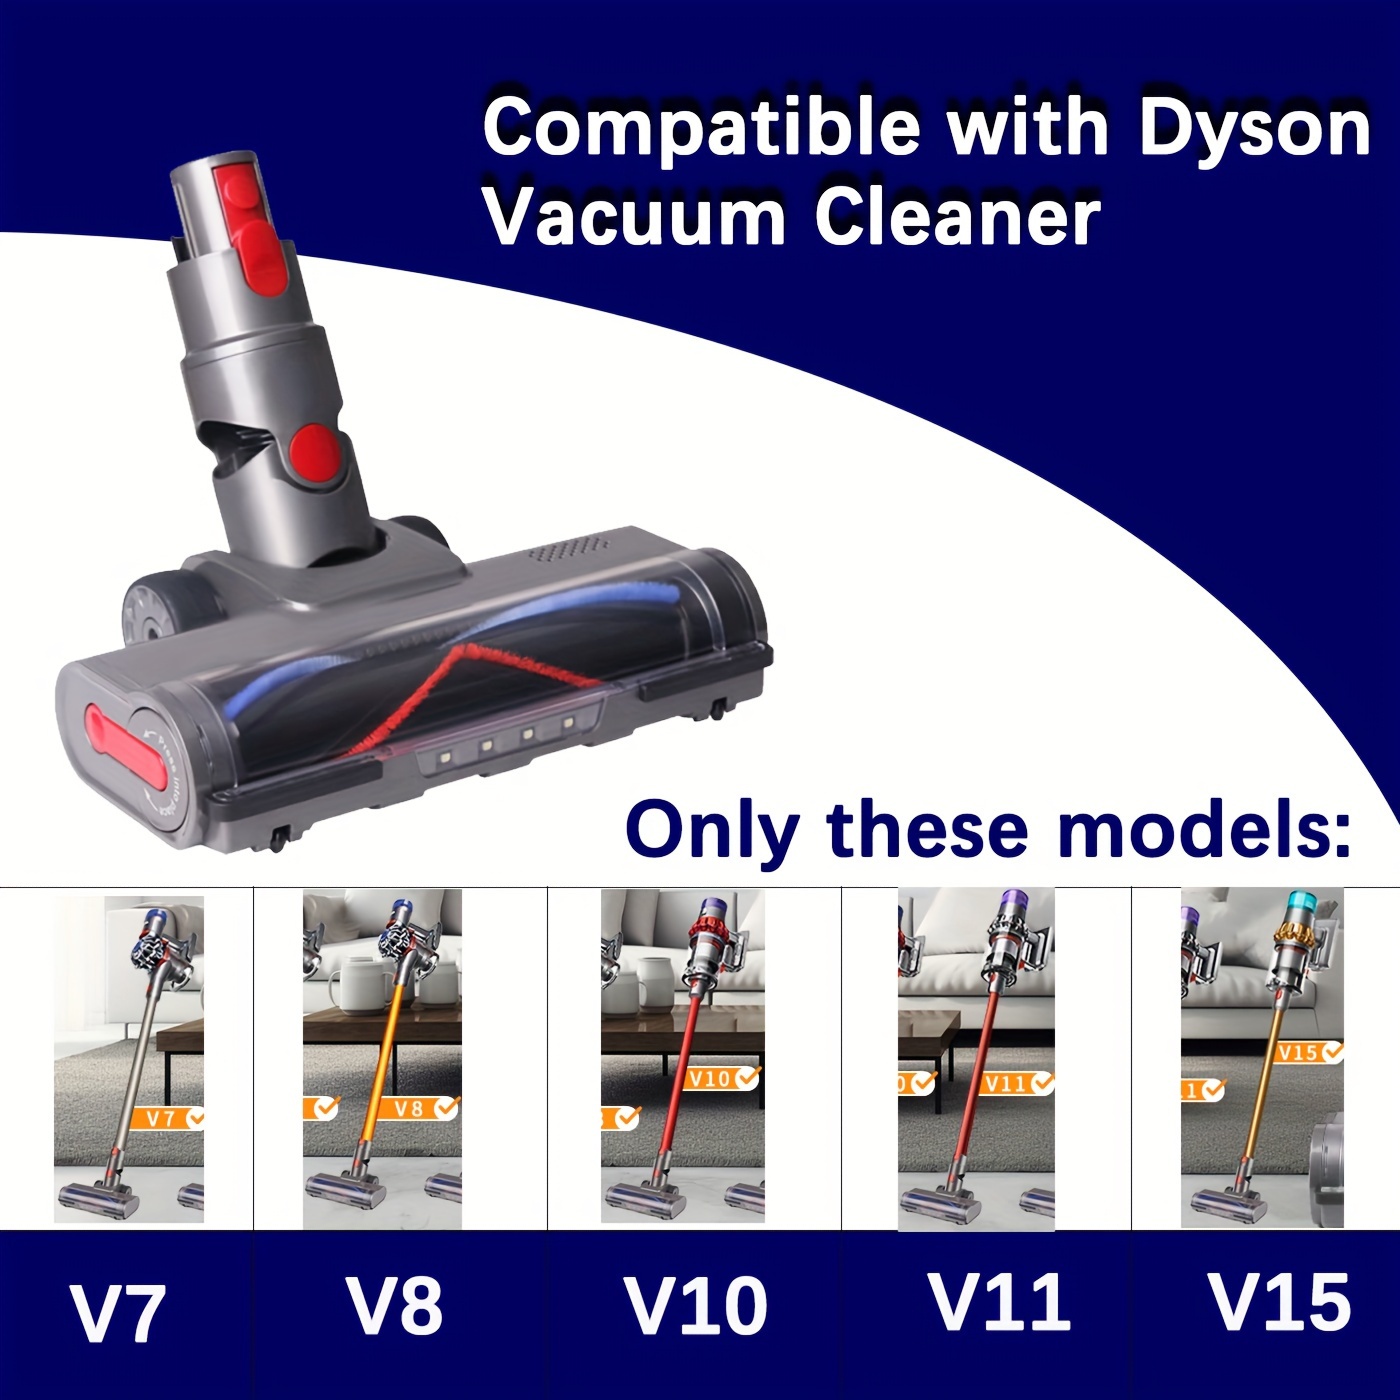 Tools Vacuum Brush Attachments Replacement for Dyson V7, V8, V10 Cordless  Vacuum Parts 8 Pack